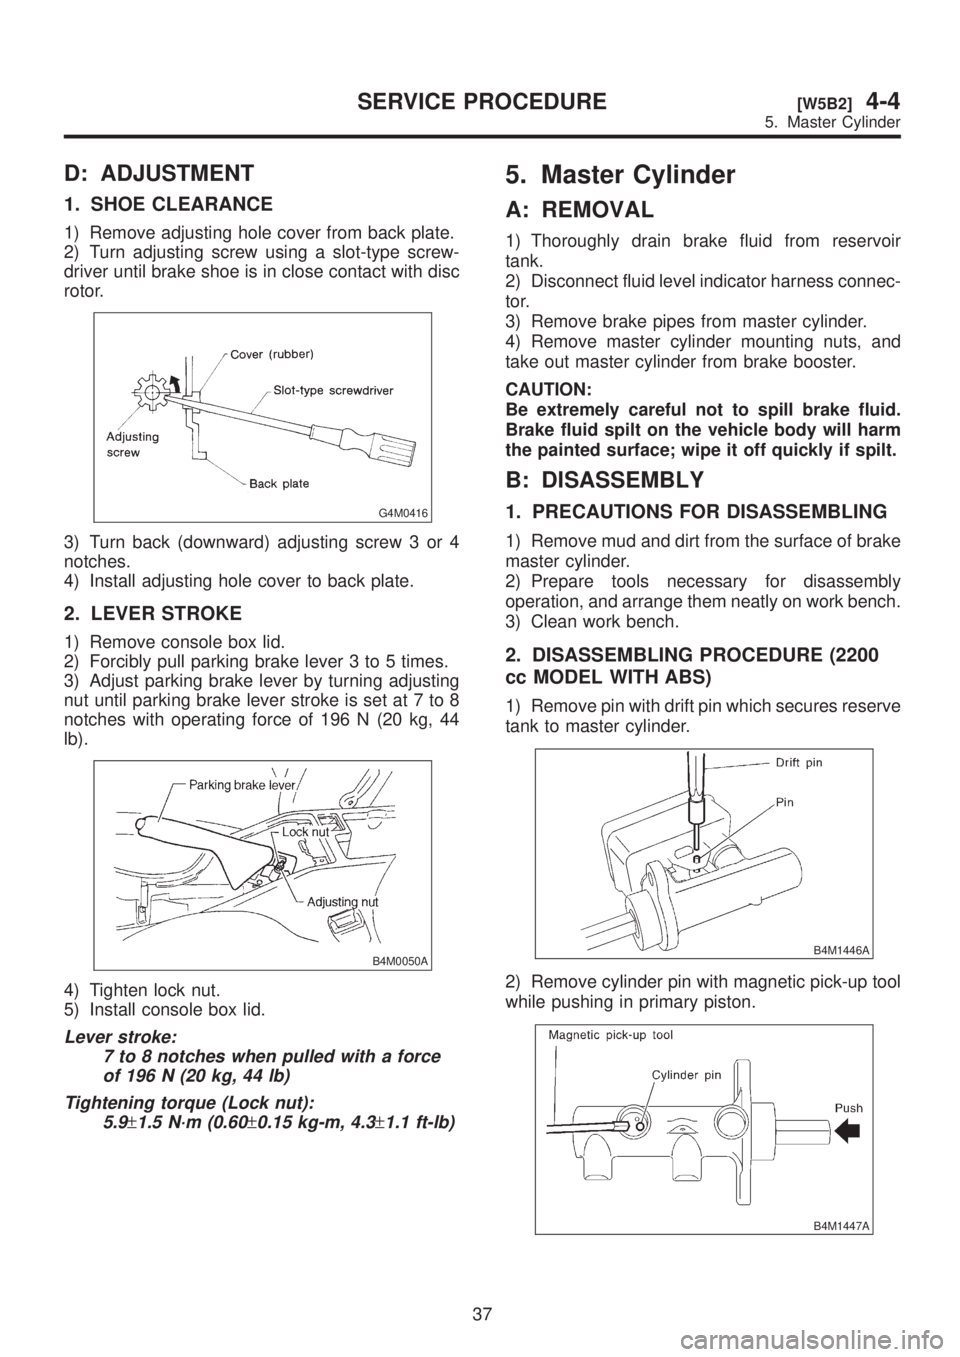 SUBARU LEGACY 1999  Service Owners Guide D: ADJUSTMENT
1. SHOE CLEARANCE
1) Remove adjusting hole cover from back plate.
2) Turn adjusting screw using a slot-type screw-
driver until brake shoe is in close contact with disc
rotor.
G4M0416
3)